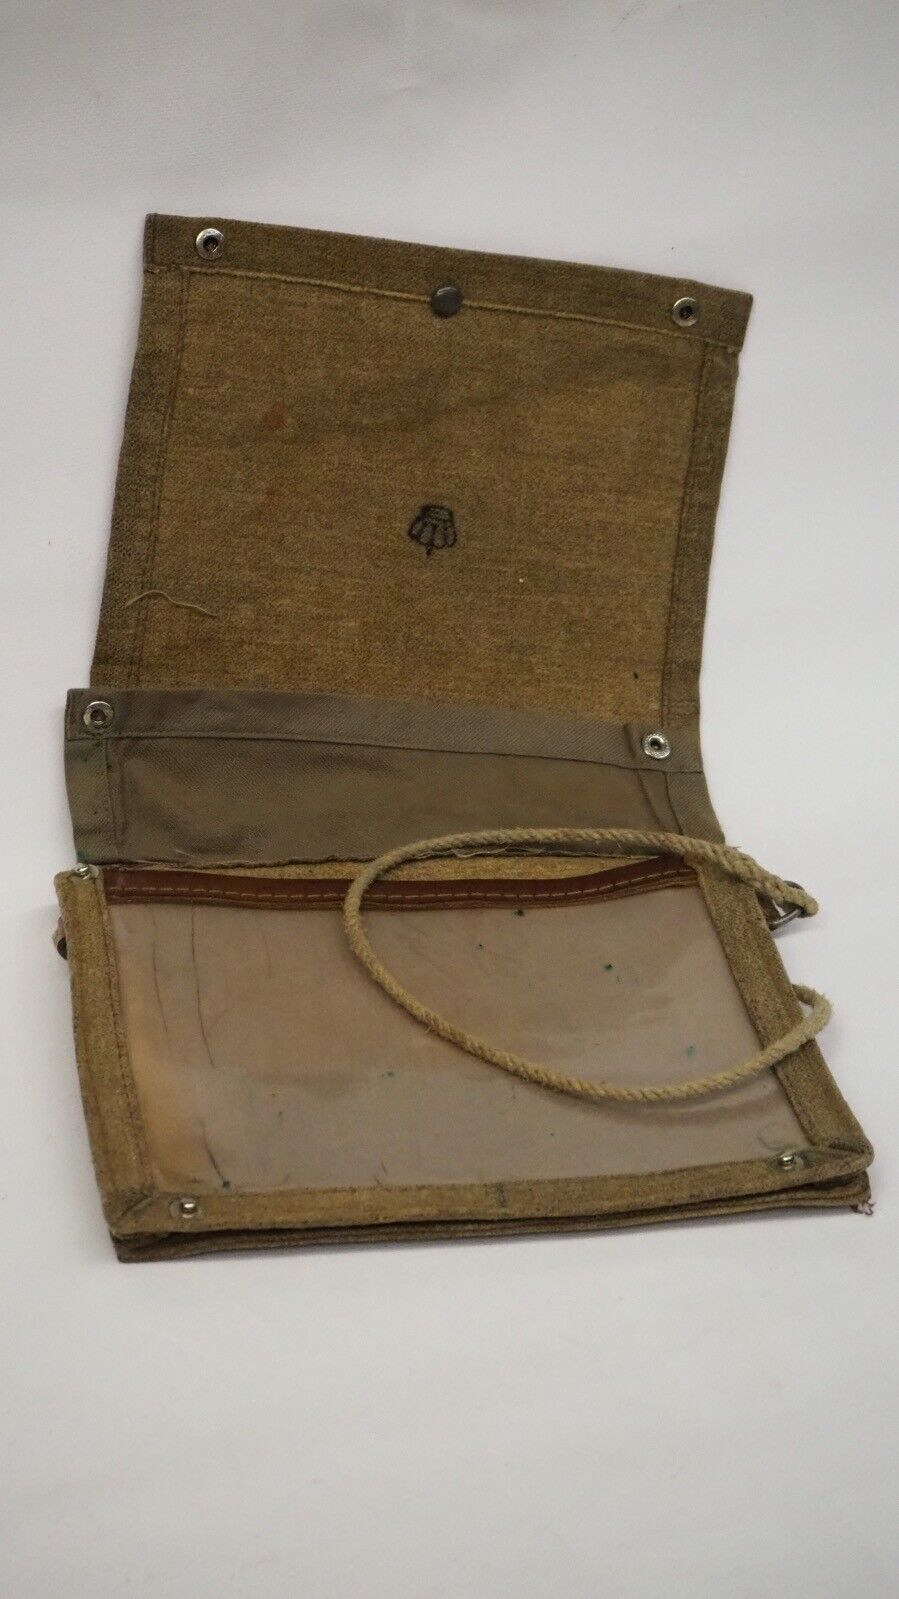 Swedish Army Map Case Wwii Vintage Cross Body Holder #wd-25